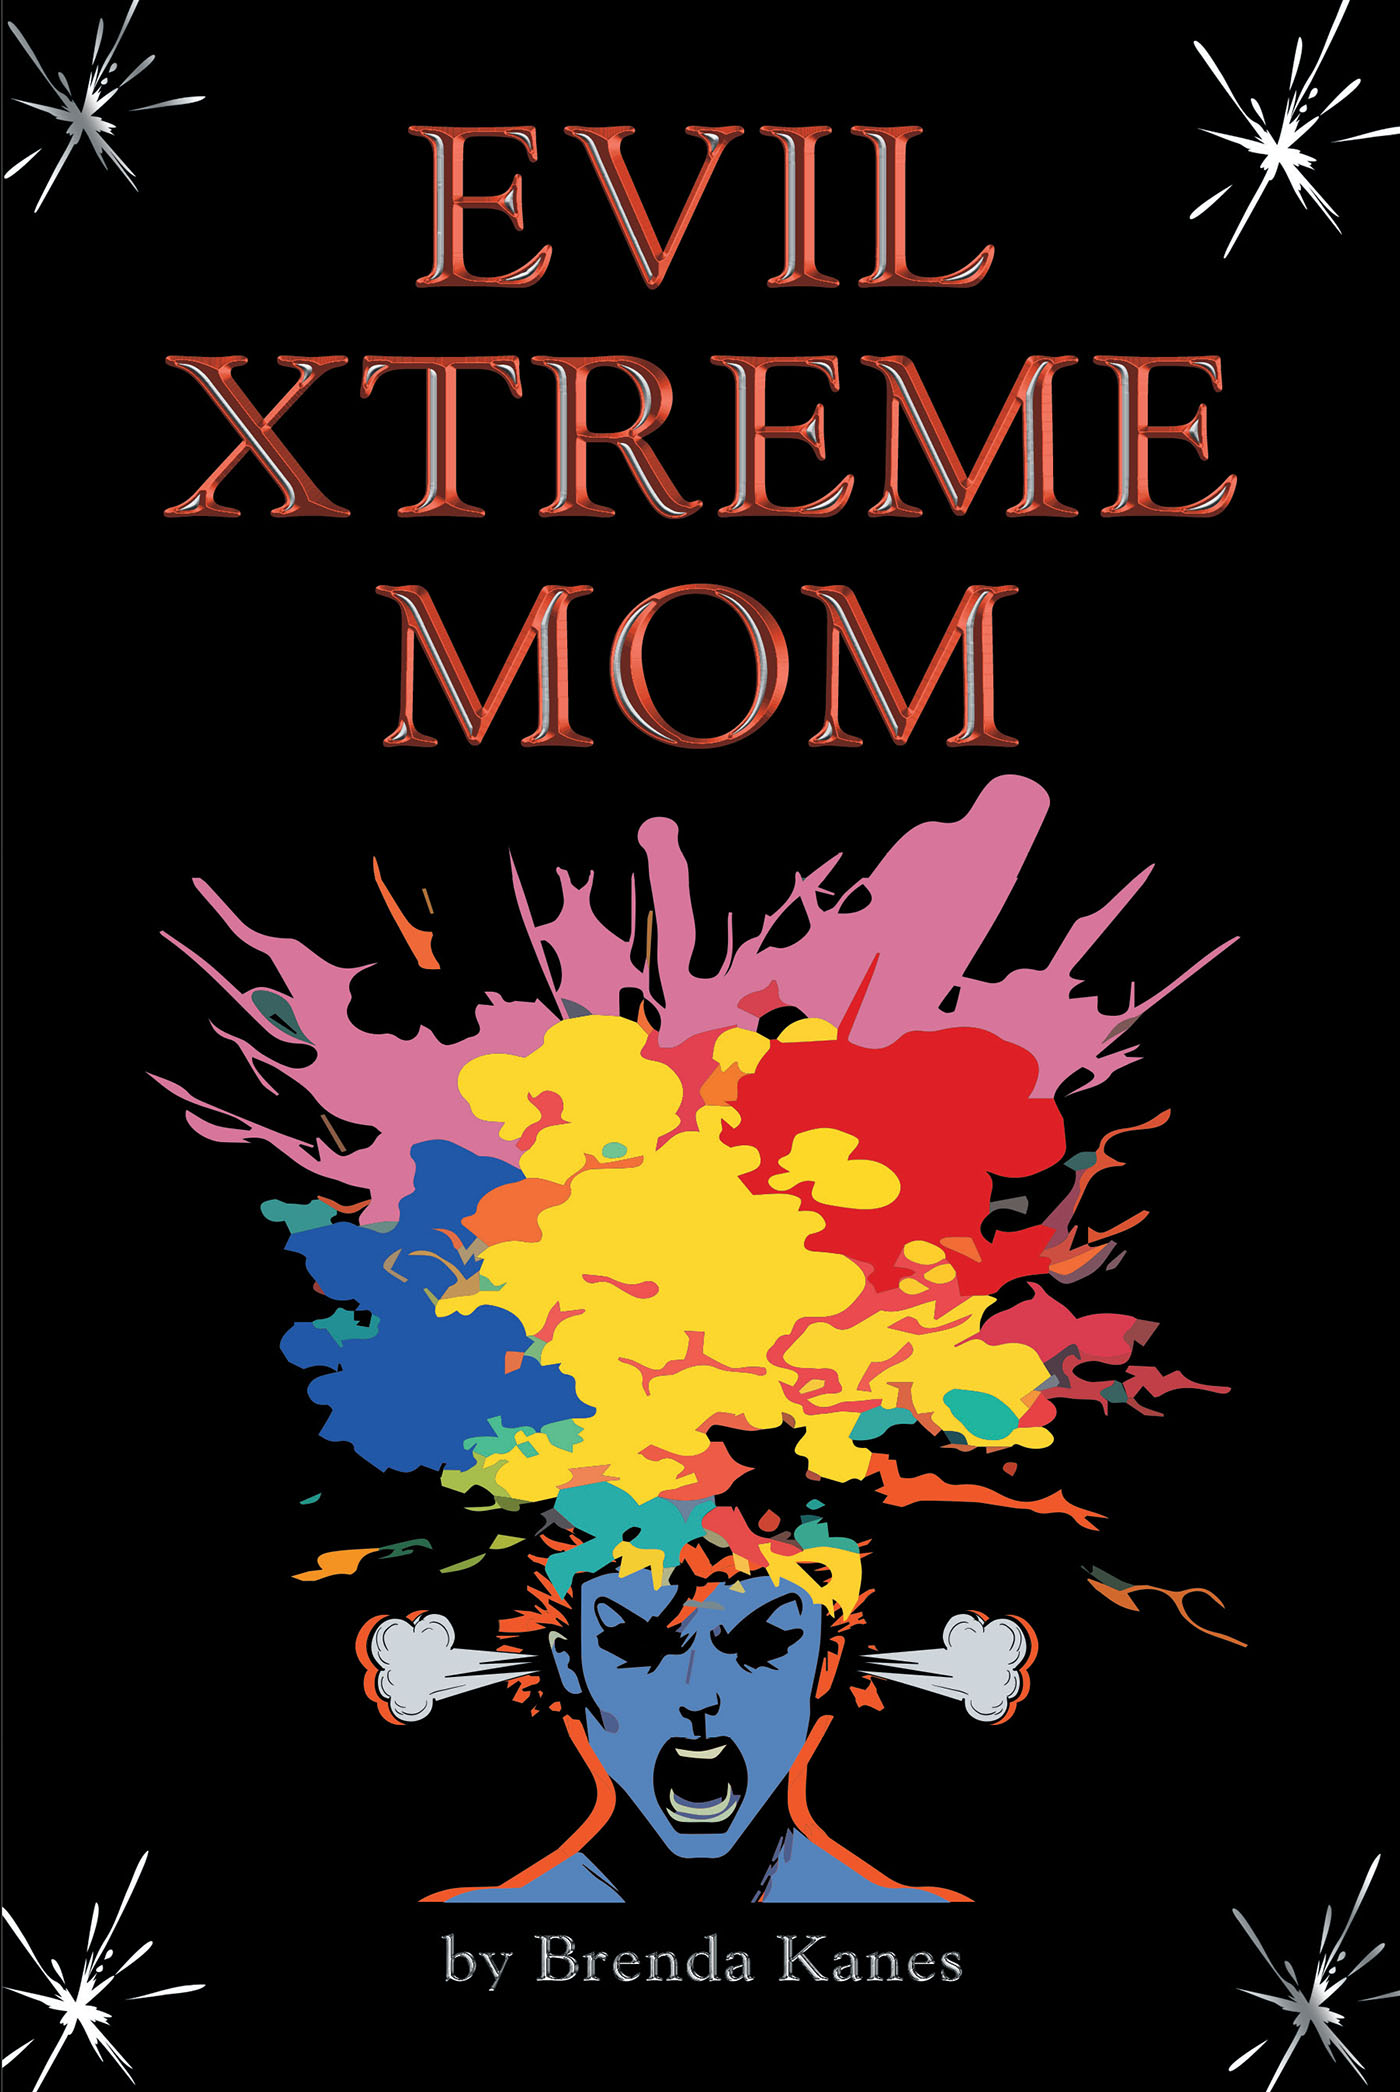 Author Brenda Kanes’ New Book, "Evil Xtreme Mom," is a Story of False Accusations of Rape and a Woman Who Plots Against a Man